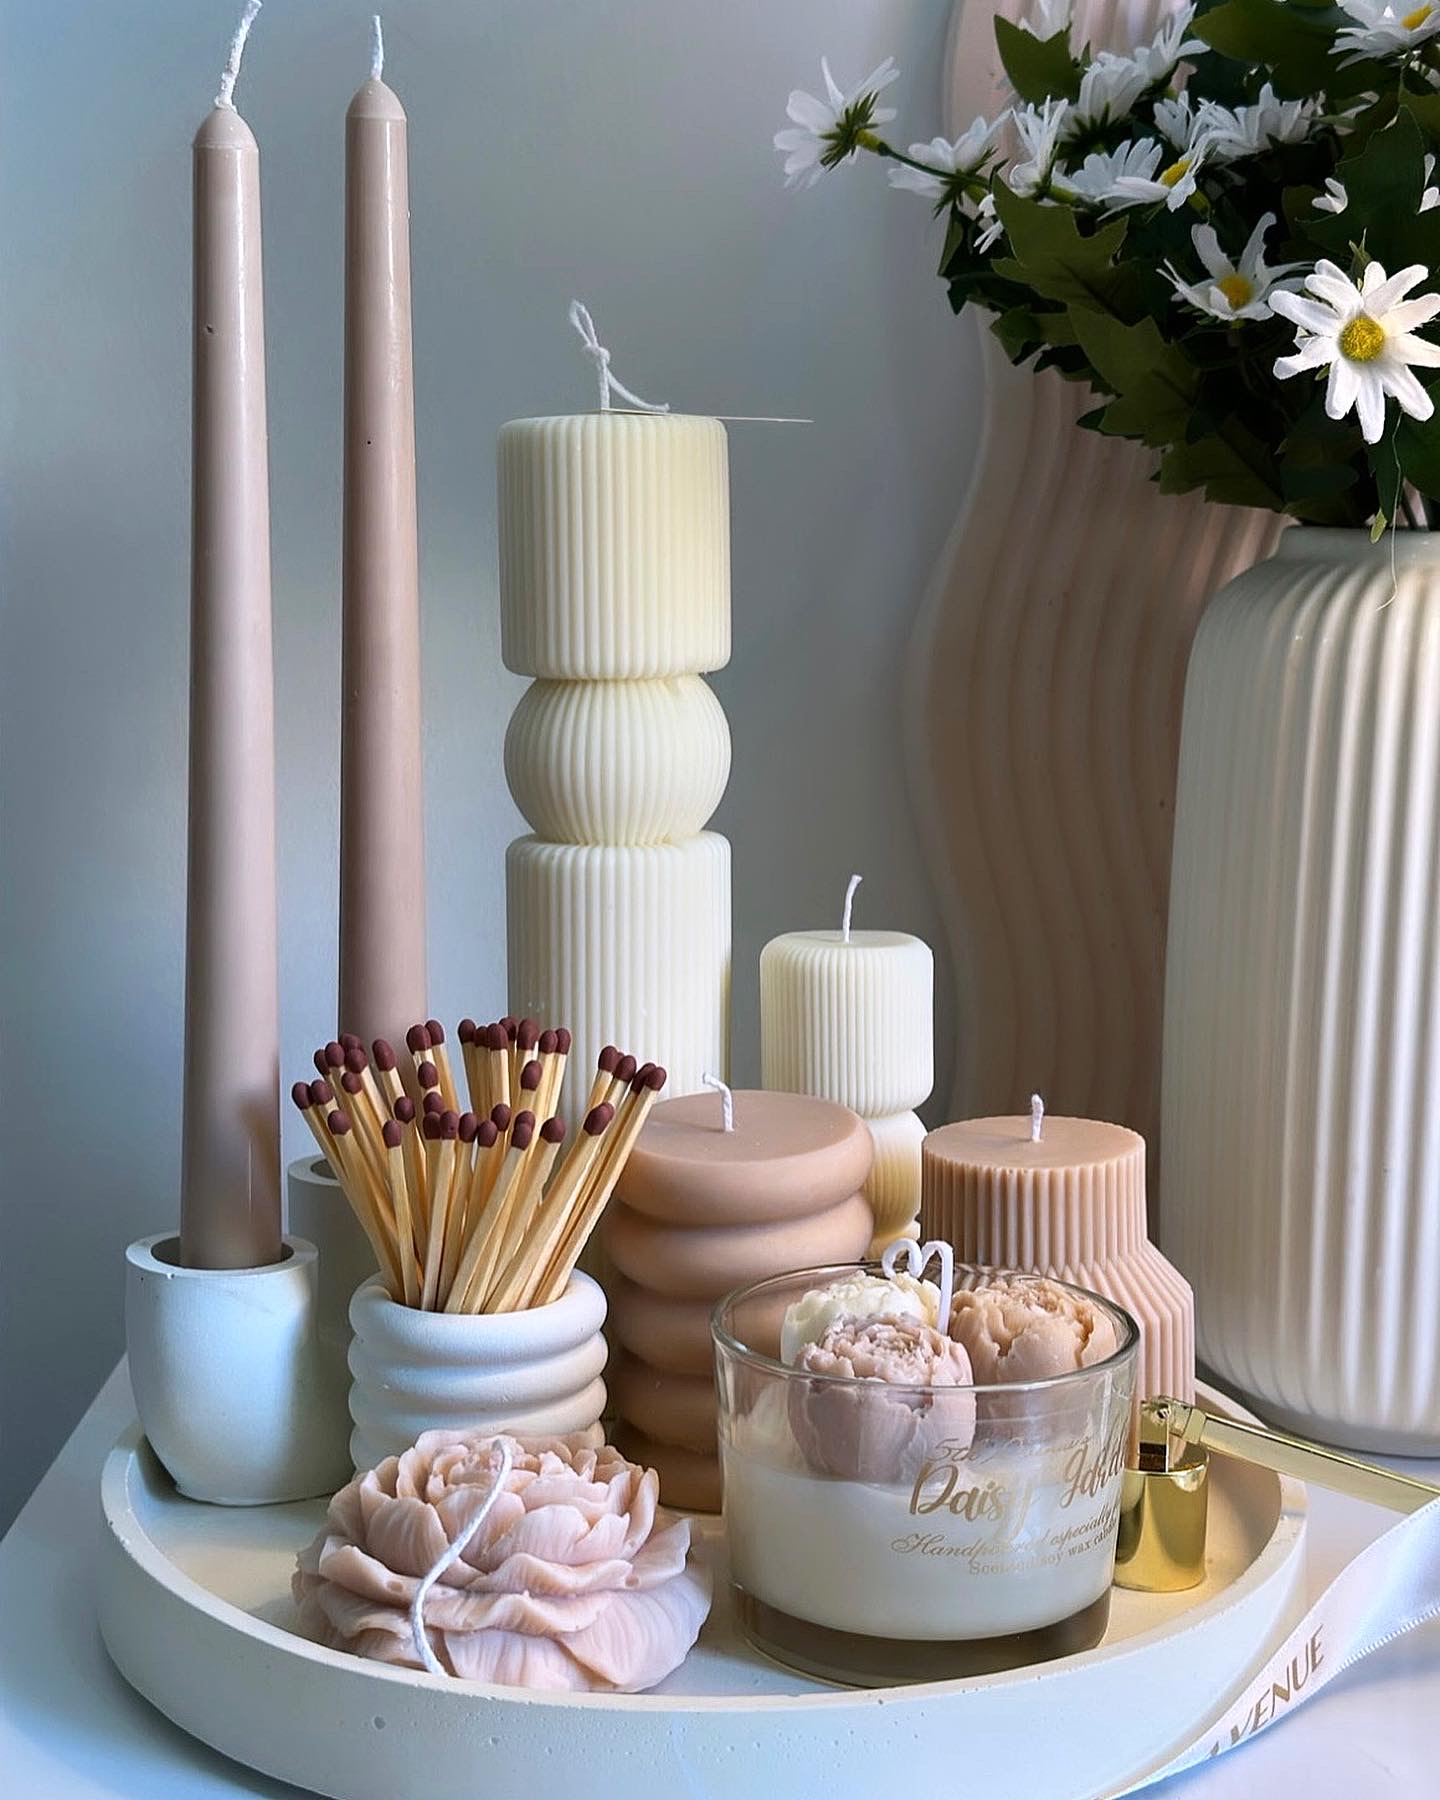 CREAMY BEIGE TABLE DECOR CANDLES